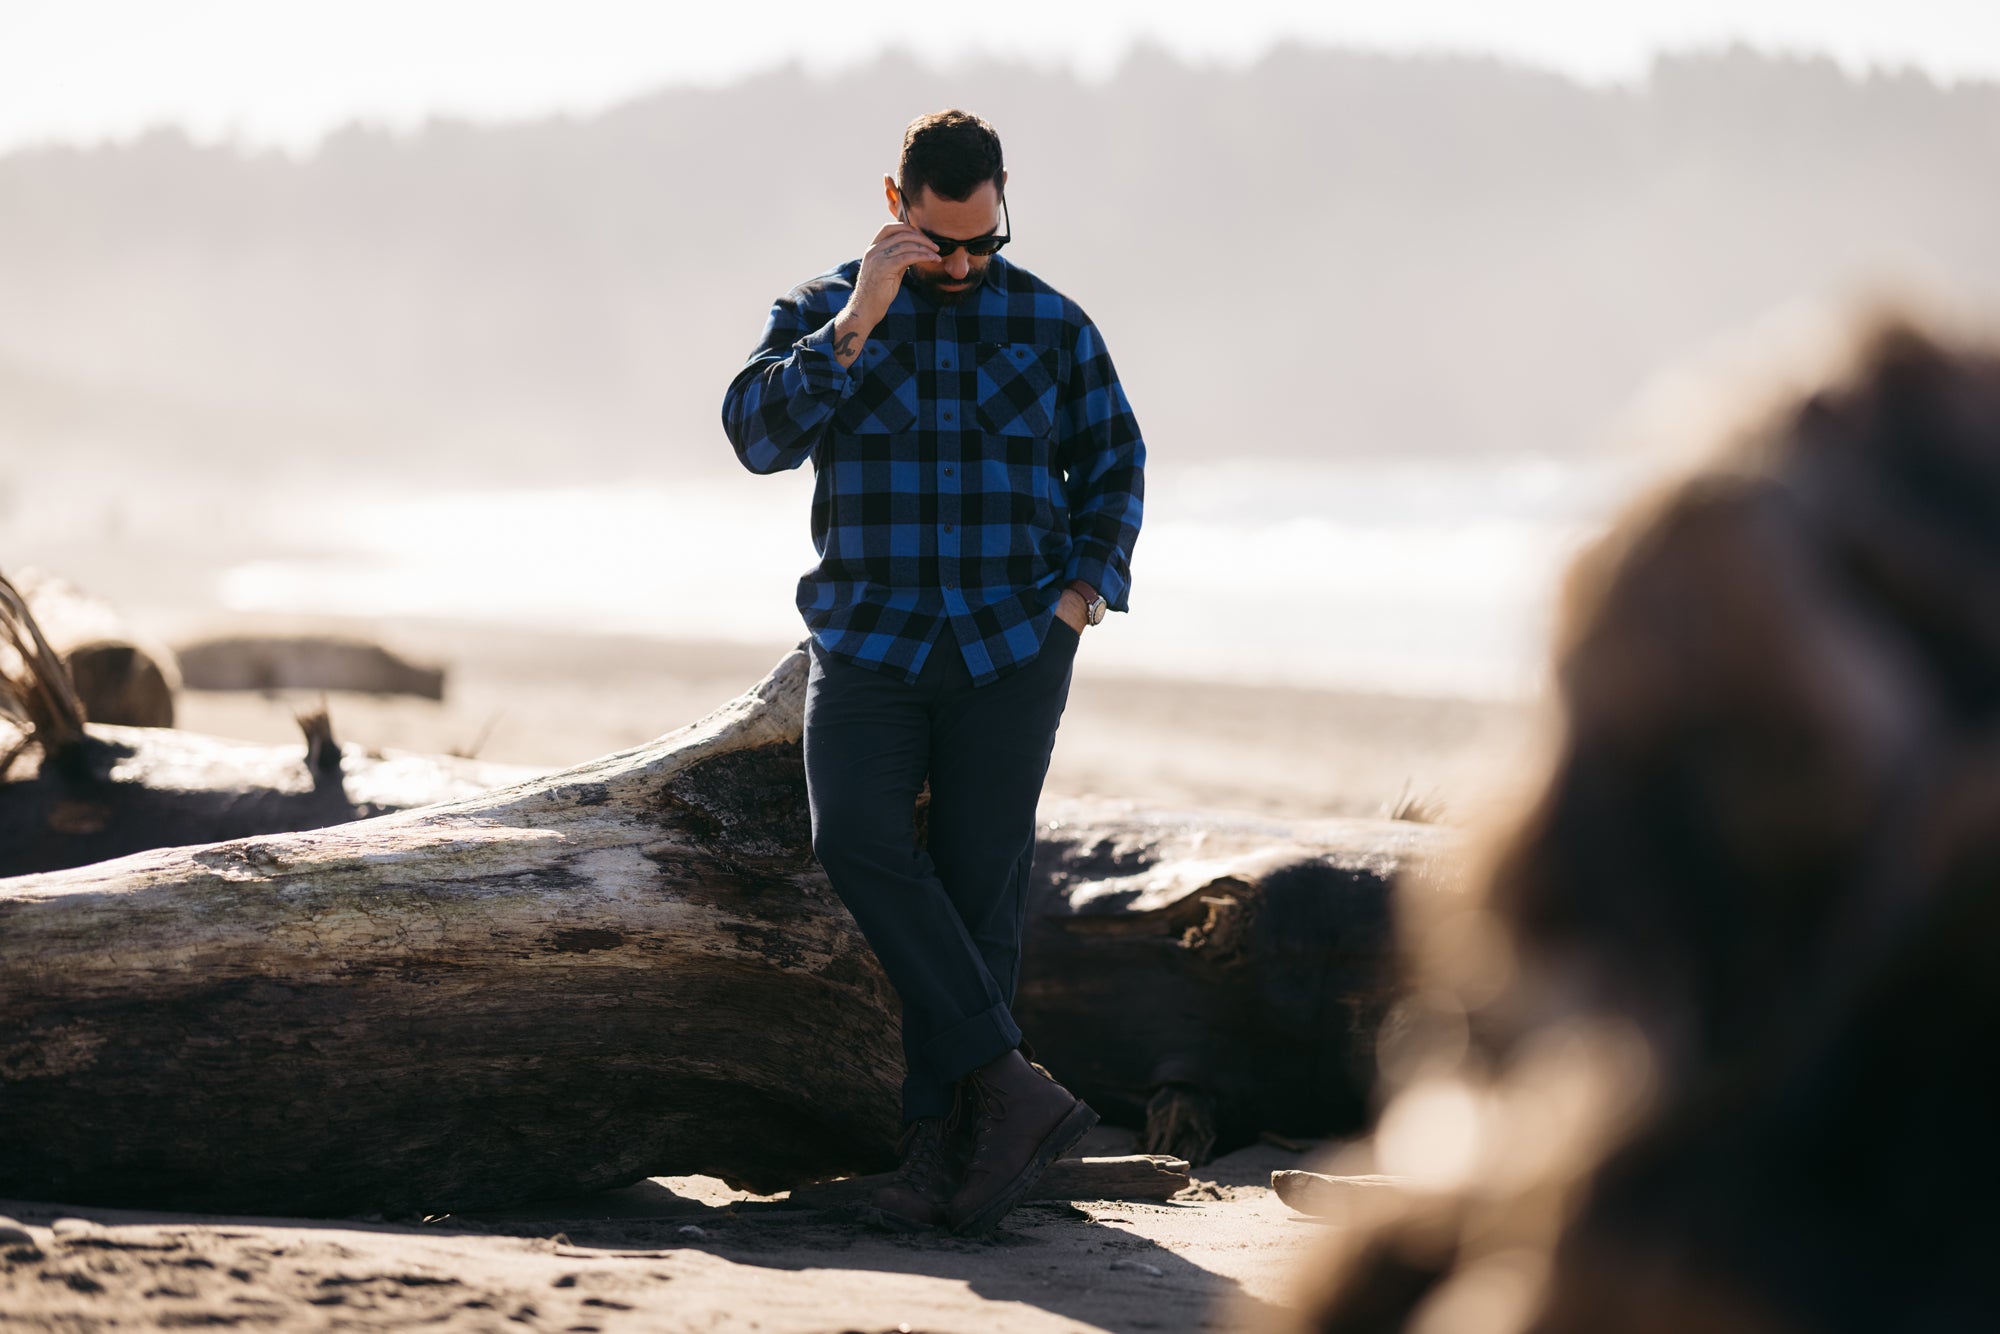 Man in sunglasses looking down leaning on a stump on a beach wearing Foreign Rider Co Blue Flannel